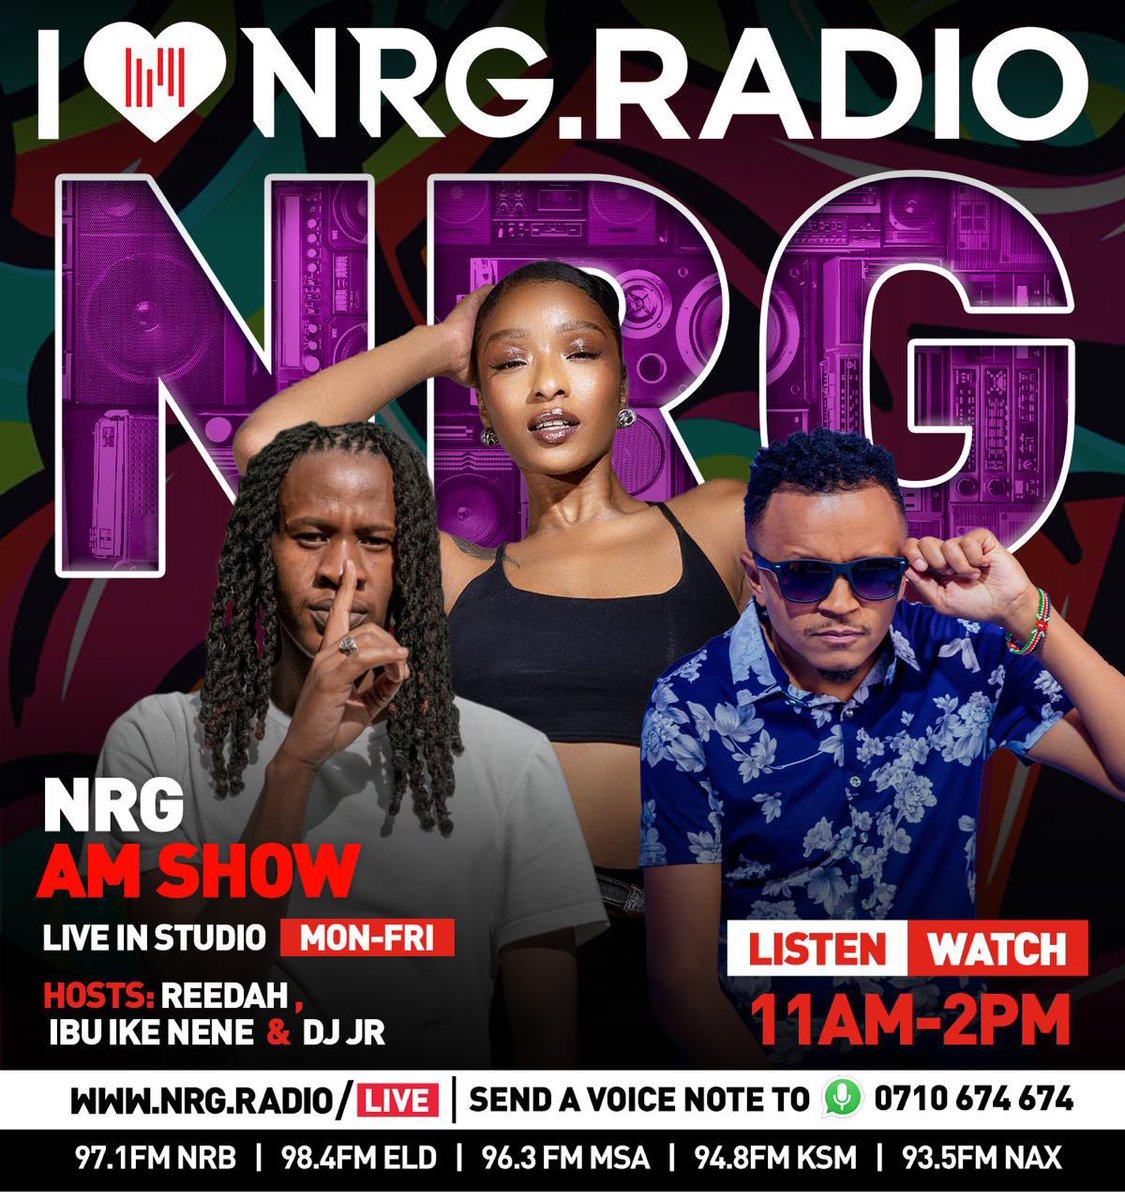 Its okayyy, Ni furahii dayy 🎶🎶 … catch the beautiful @reedah_yvonne and the baddest dj @djjr254 on the hottest midday show #nrgamshow